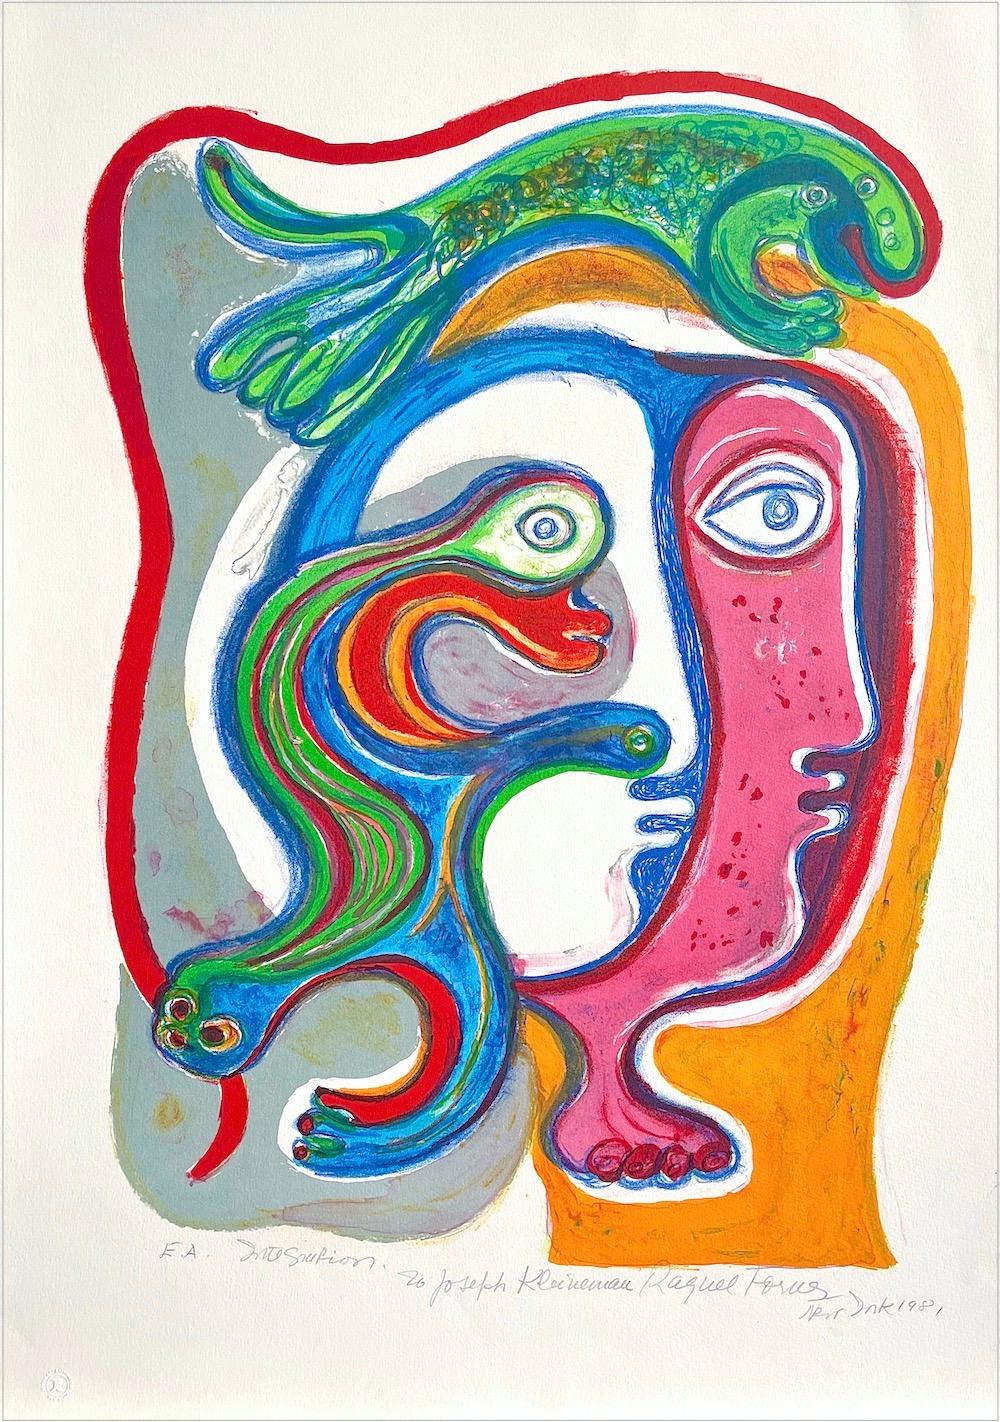 INTEGRACION Signed Lithograph, Abstract Portrait, Latin American Woman Artist - Print by Raquel Forner